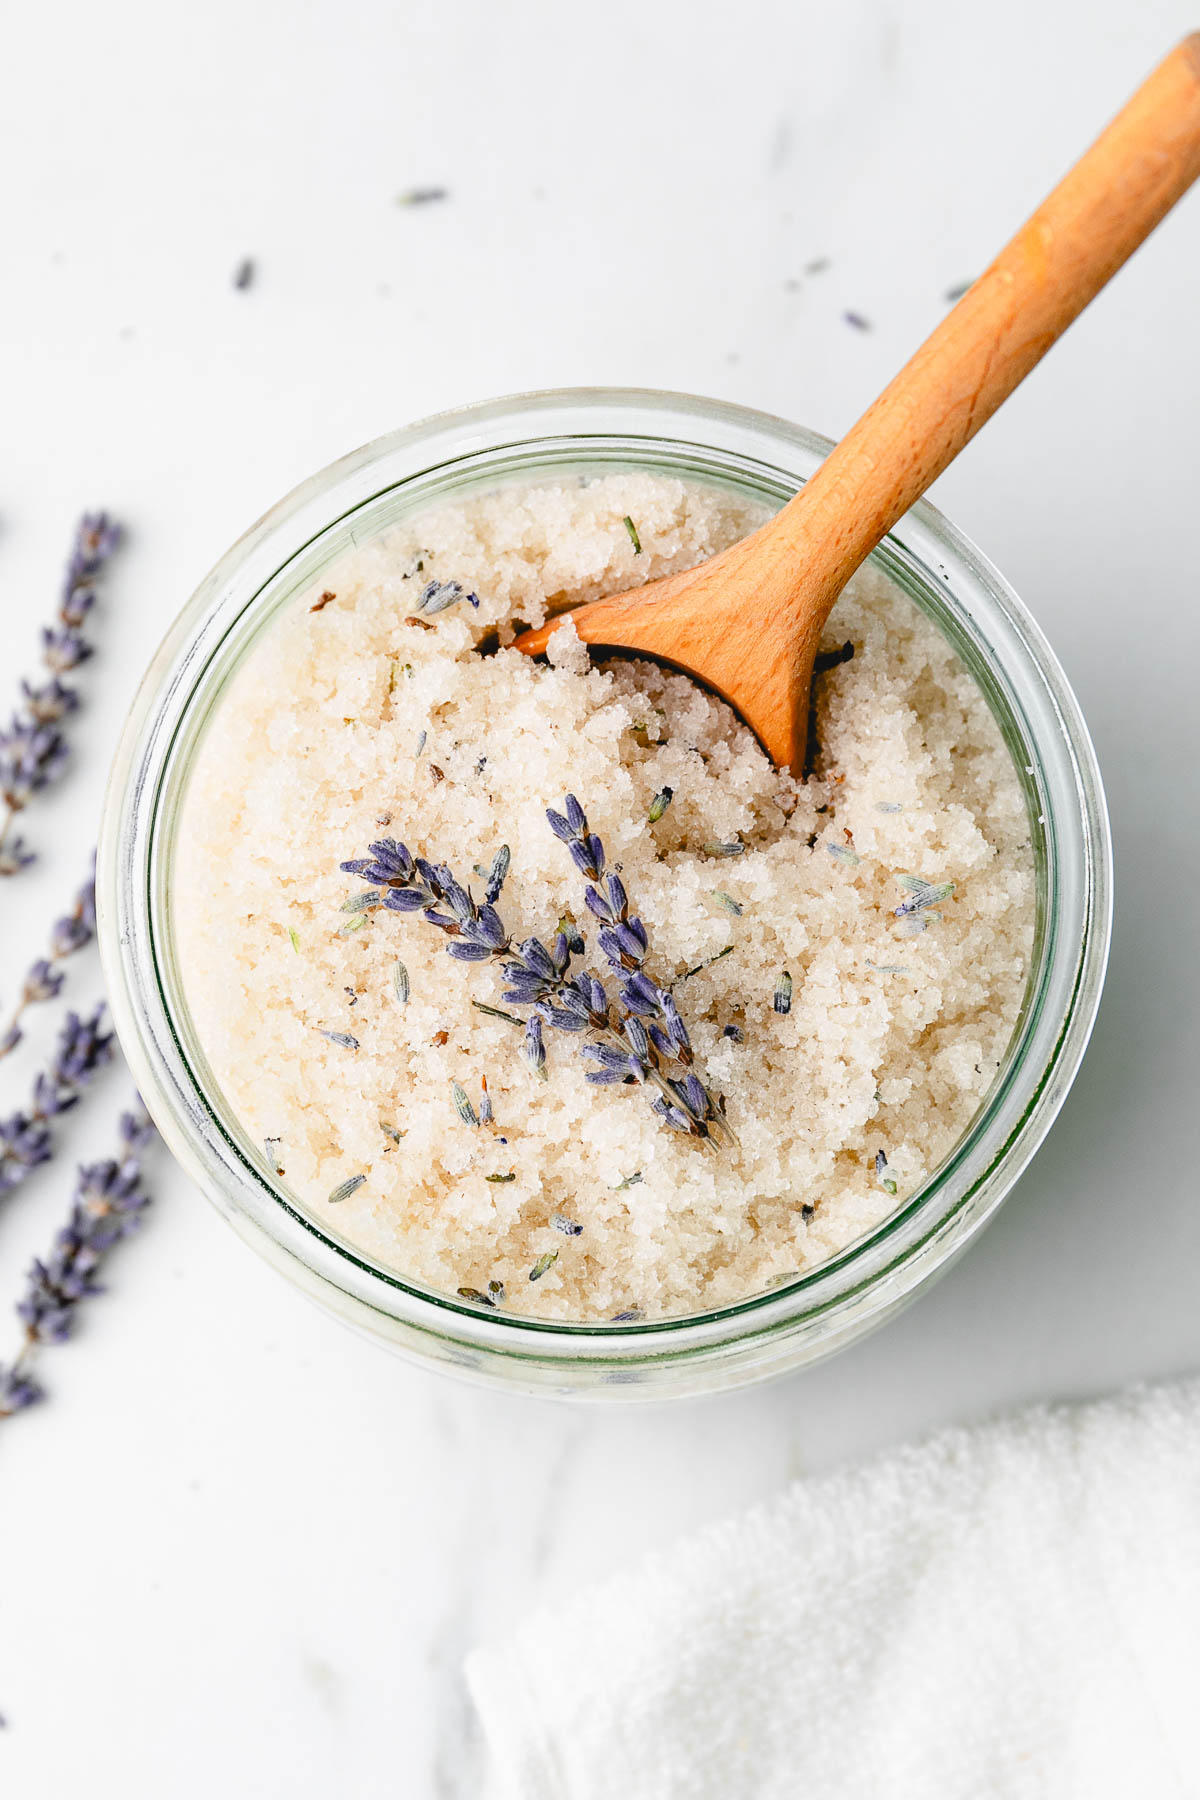 top down view of glass jar with lavender sugar scrub and wooden spoon.